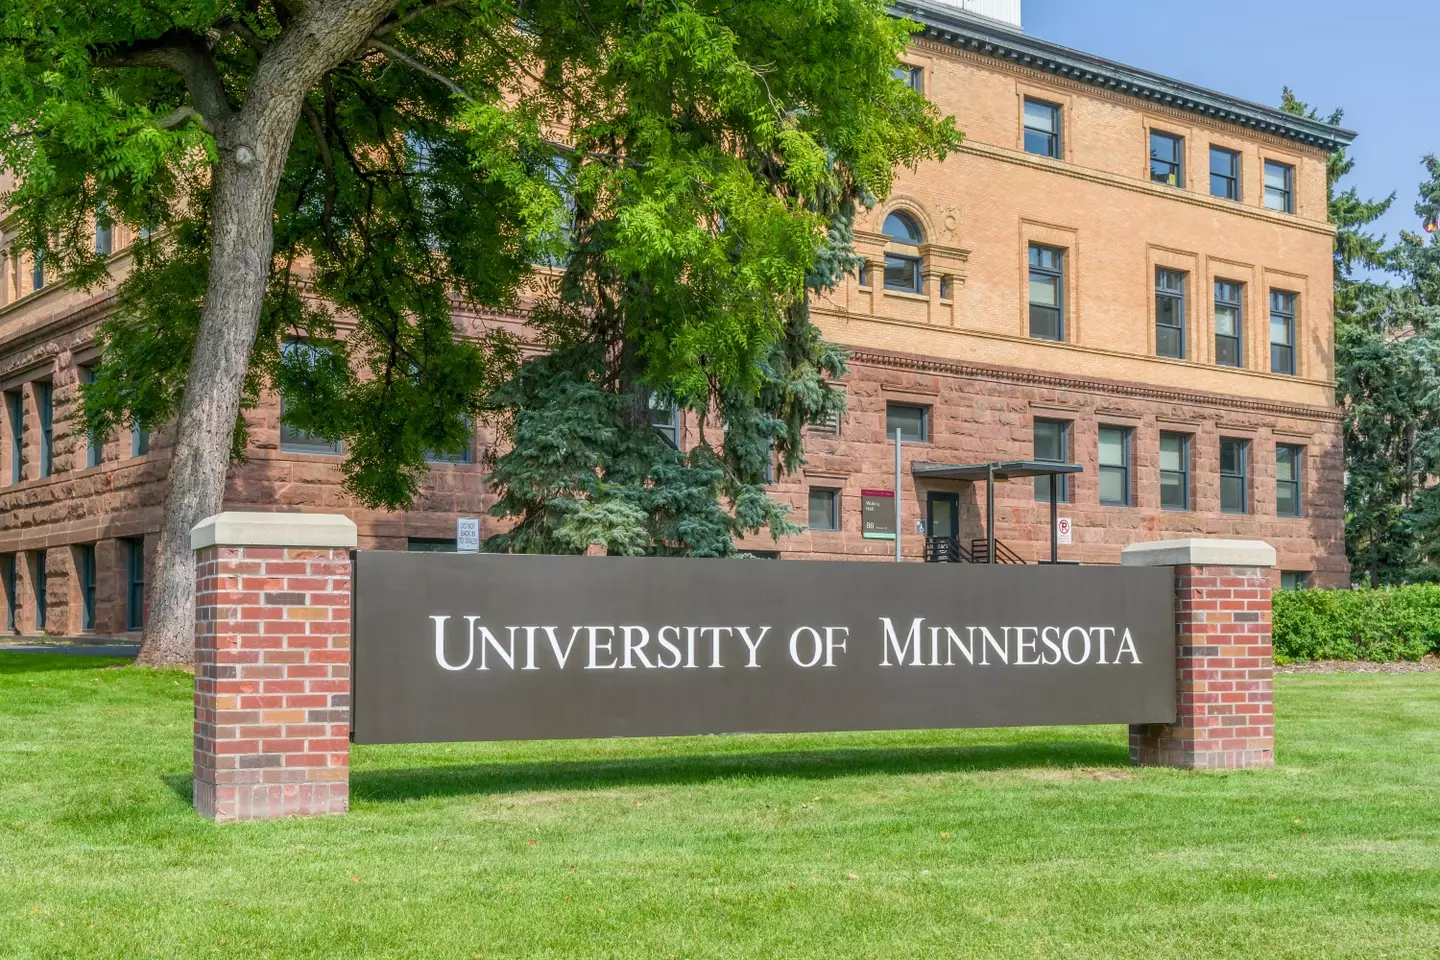 Betty began studying at the University of Minnesota in 1955.